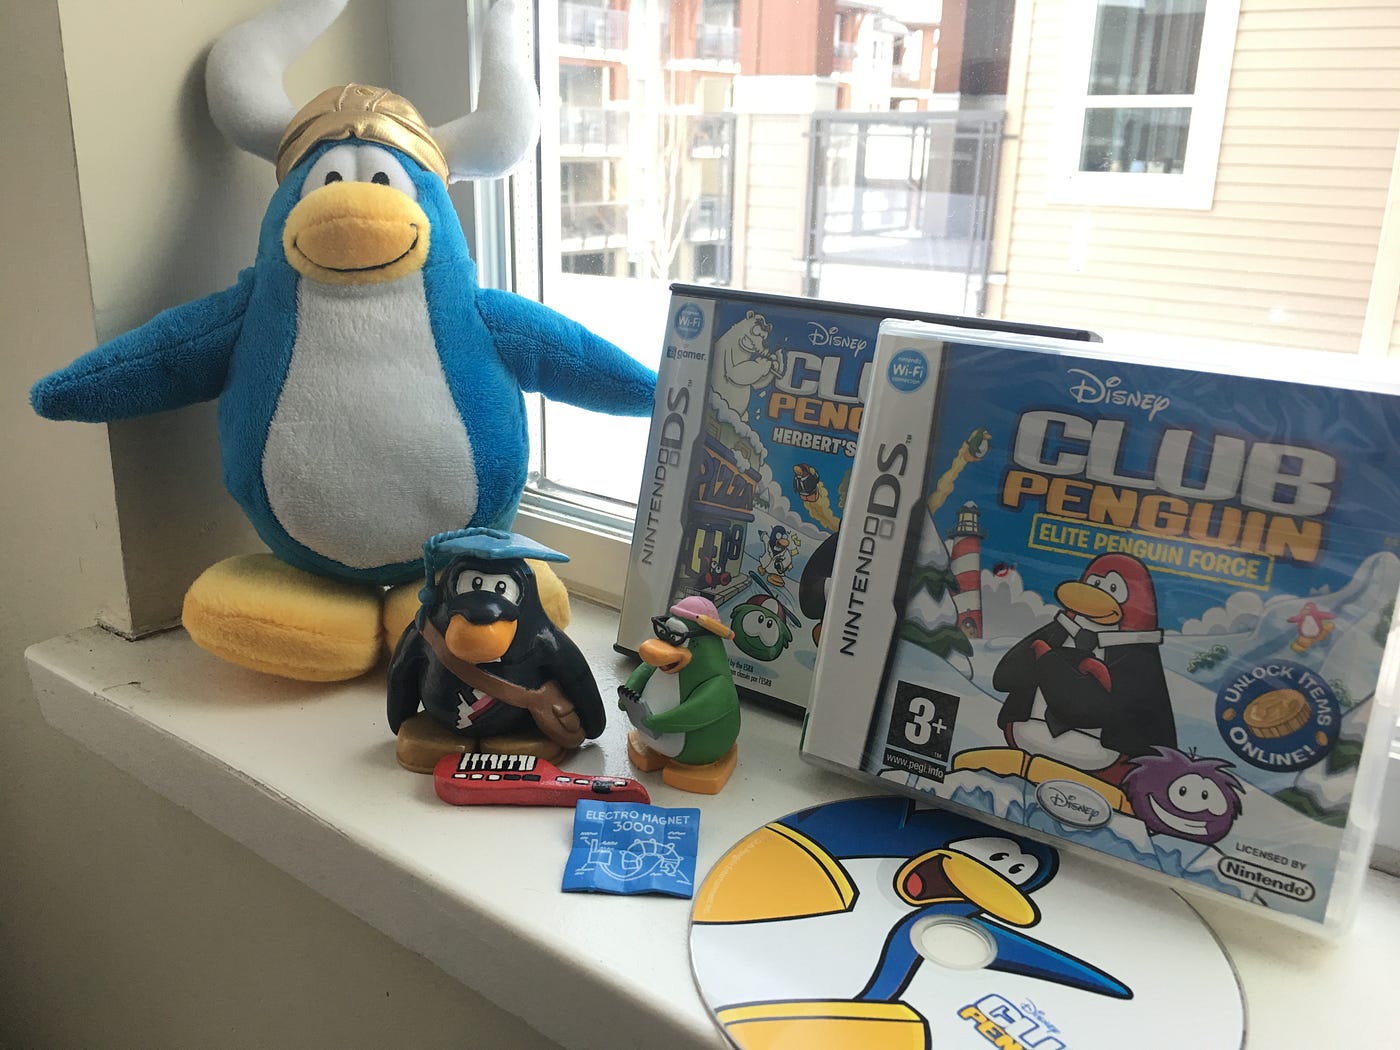 Club Penguin Card-Jitsu water collection for sale - happy to take